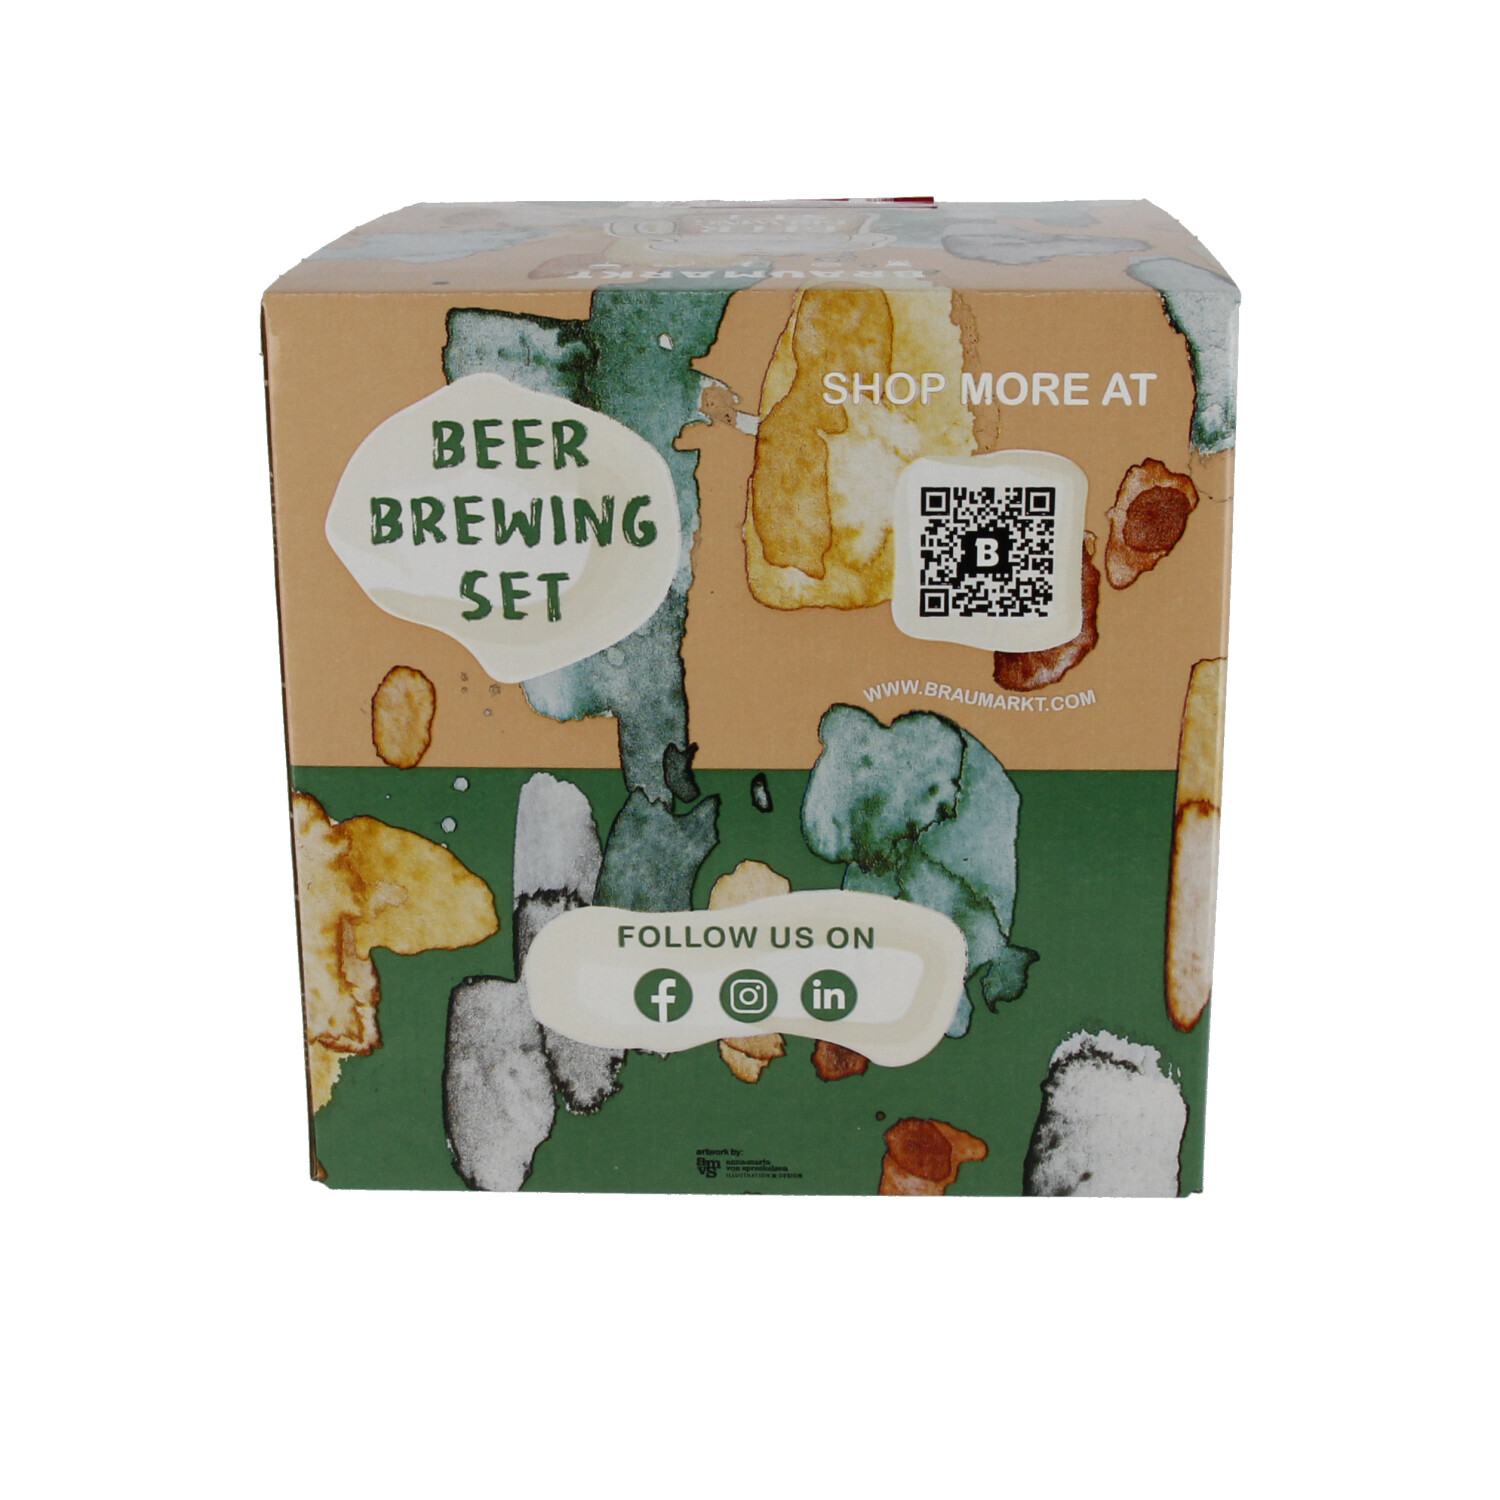 Craft brew kit Frontaal Andreas 5l